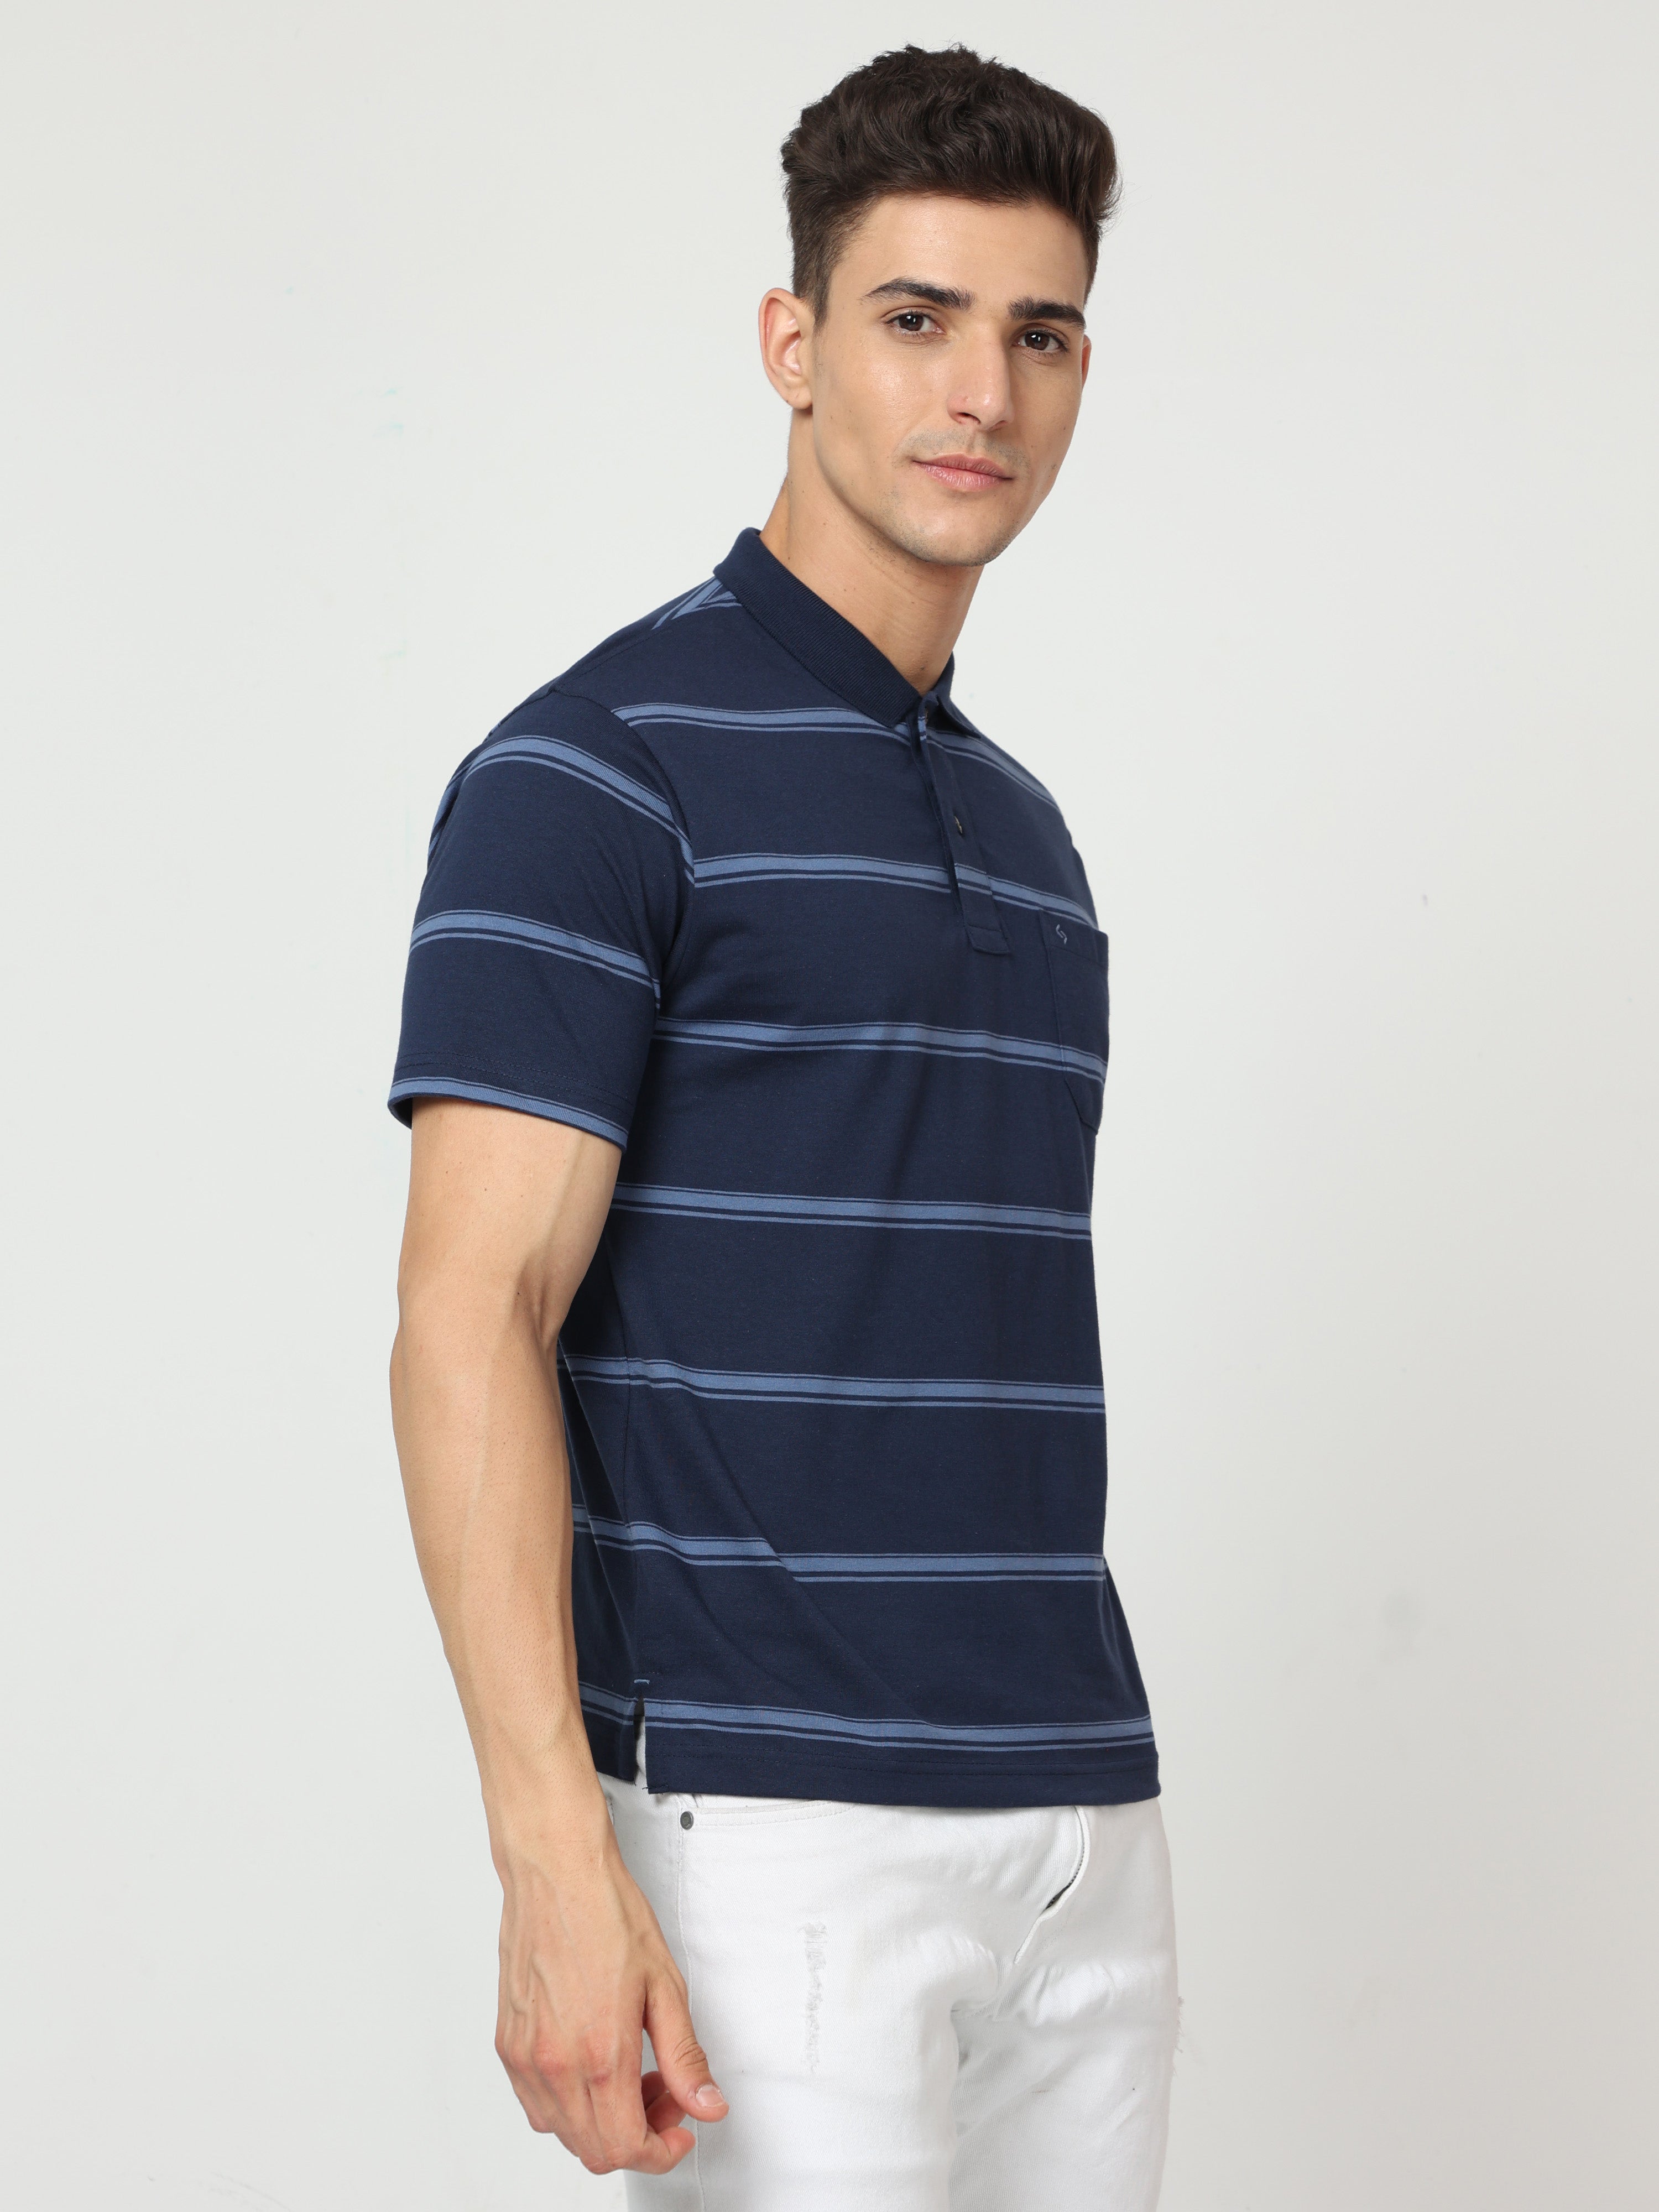 Classic Polo Mens Pure Cotton Half Sleeve Striped Regular Fit Polo Neck Navy Color T Shirt | F-Avon - 109 B